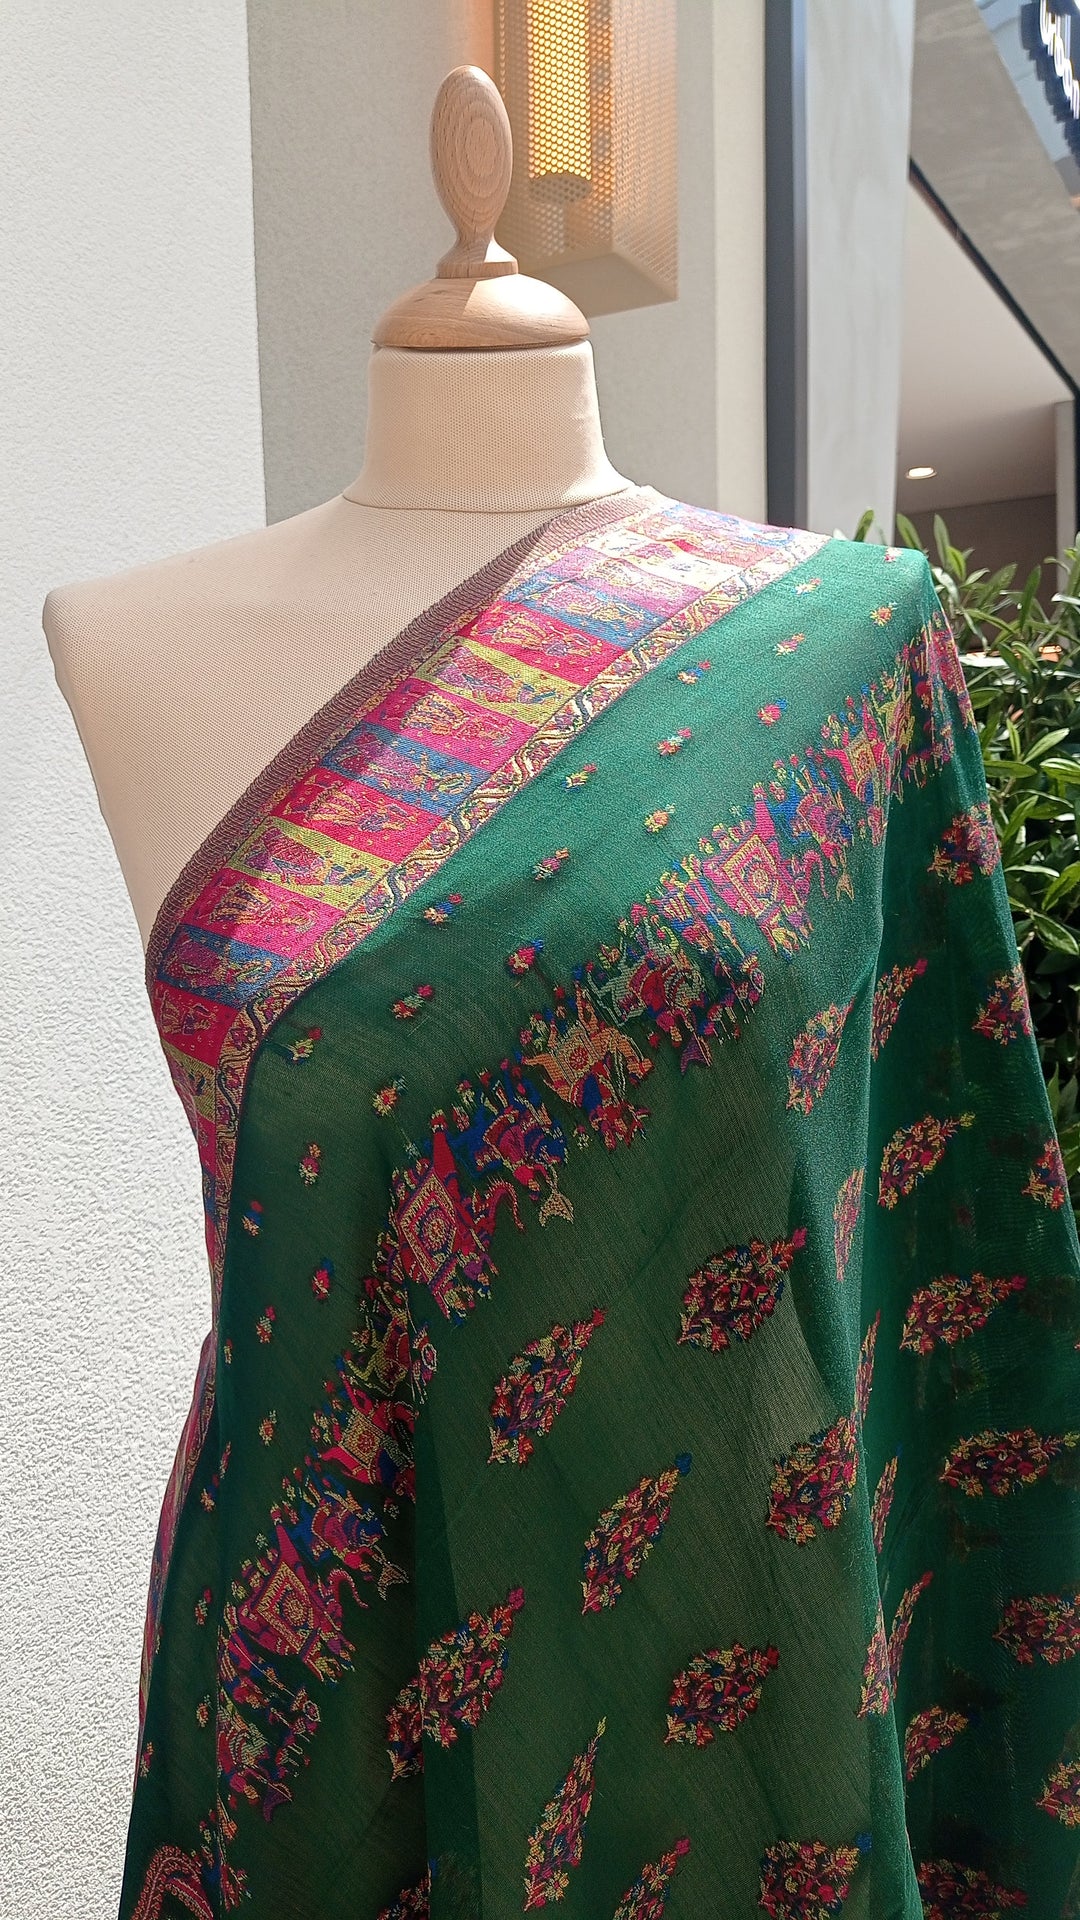 Archana Emerald and Red Kattan Silk Dupatta with Paisleys and a Mughal Procession Border